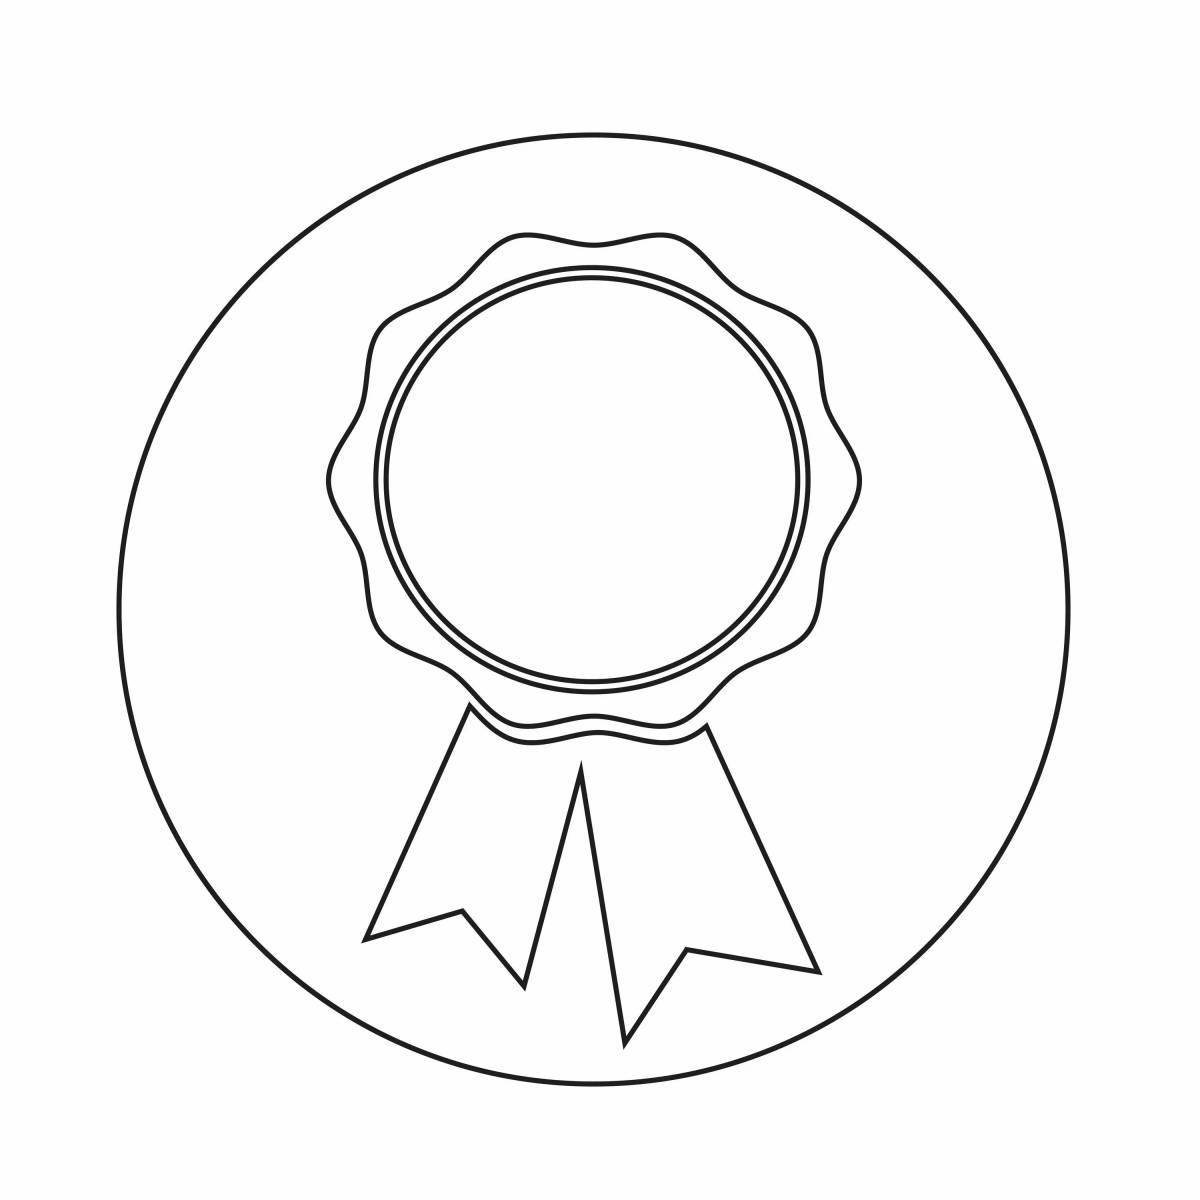 Gorgeous medal template for February 23rd